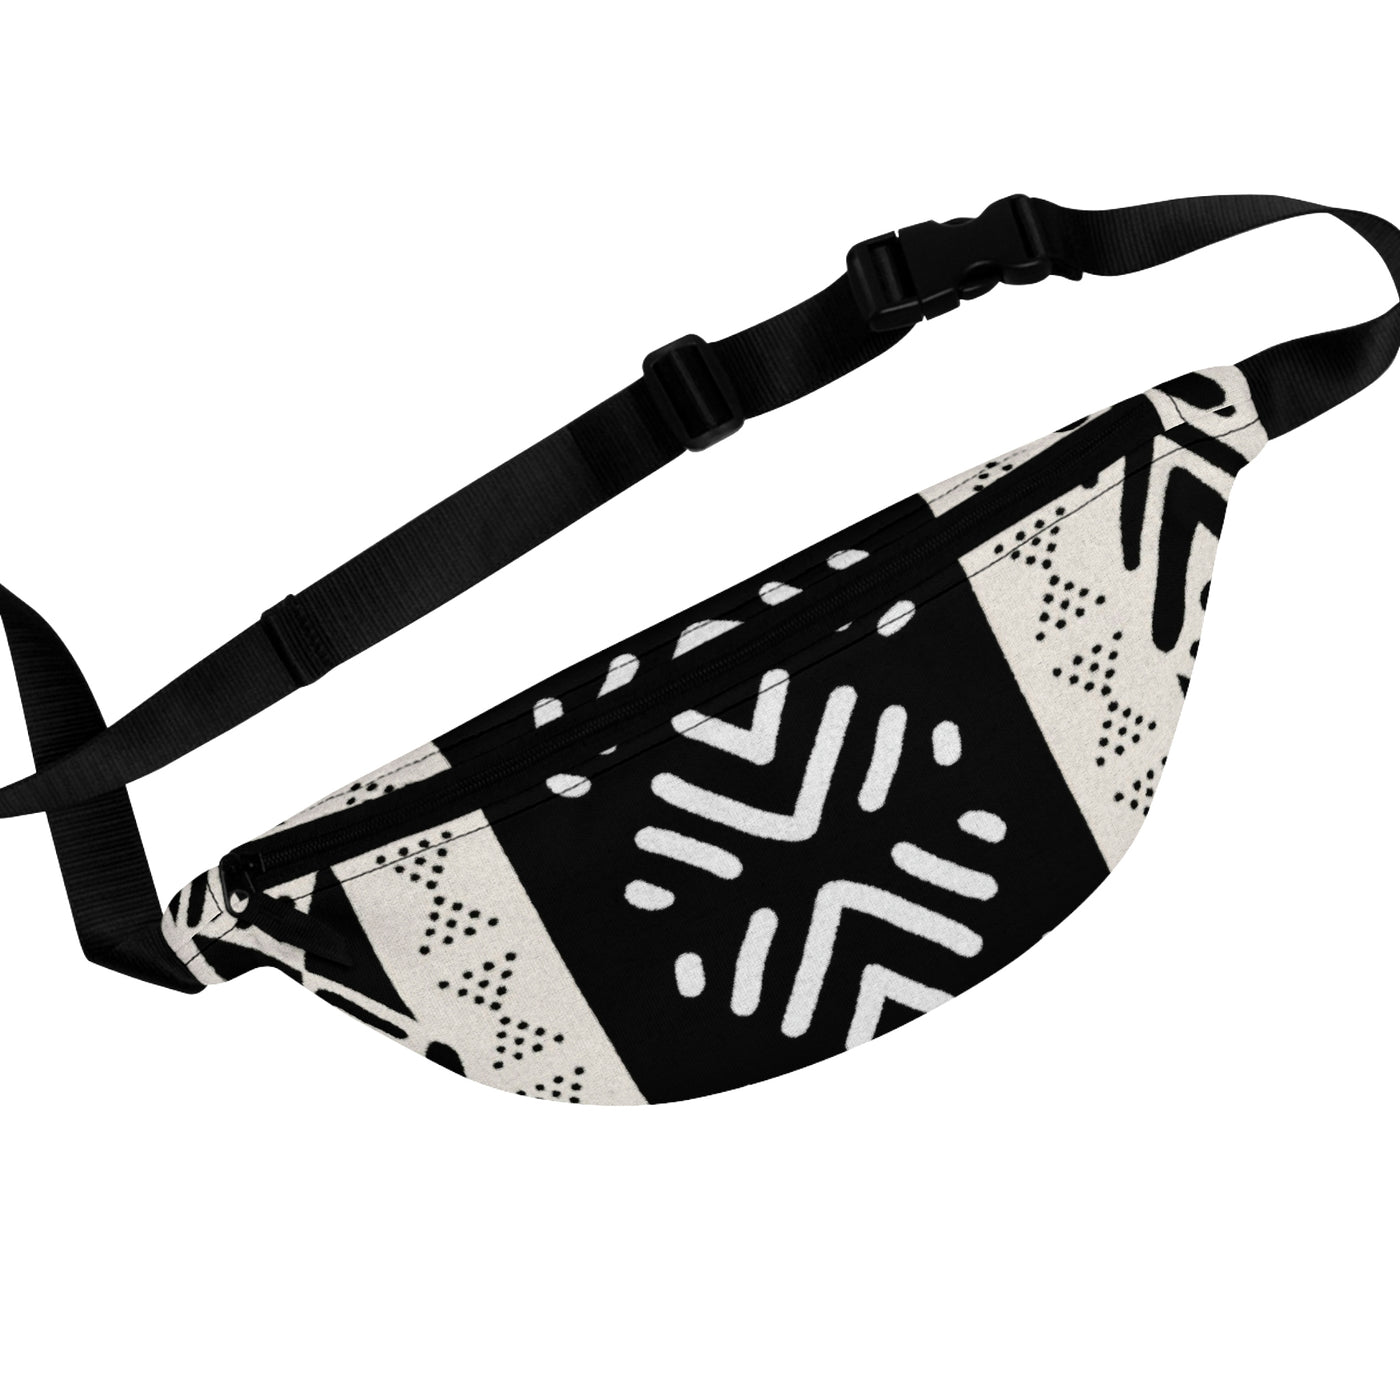 Mudcloth Black and White and Black Fanny Pack